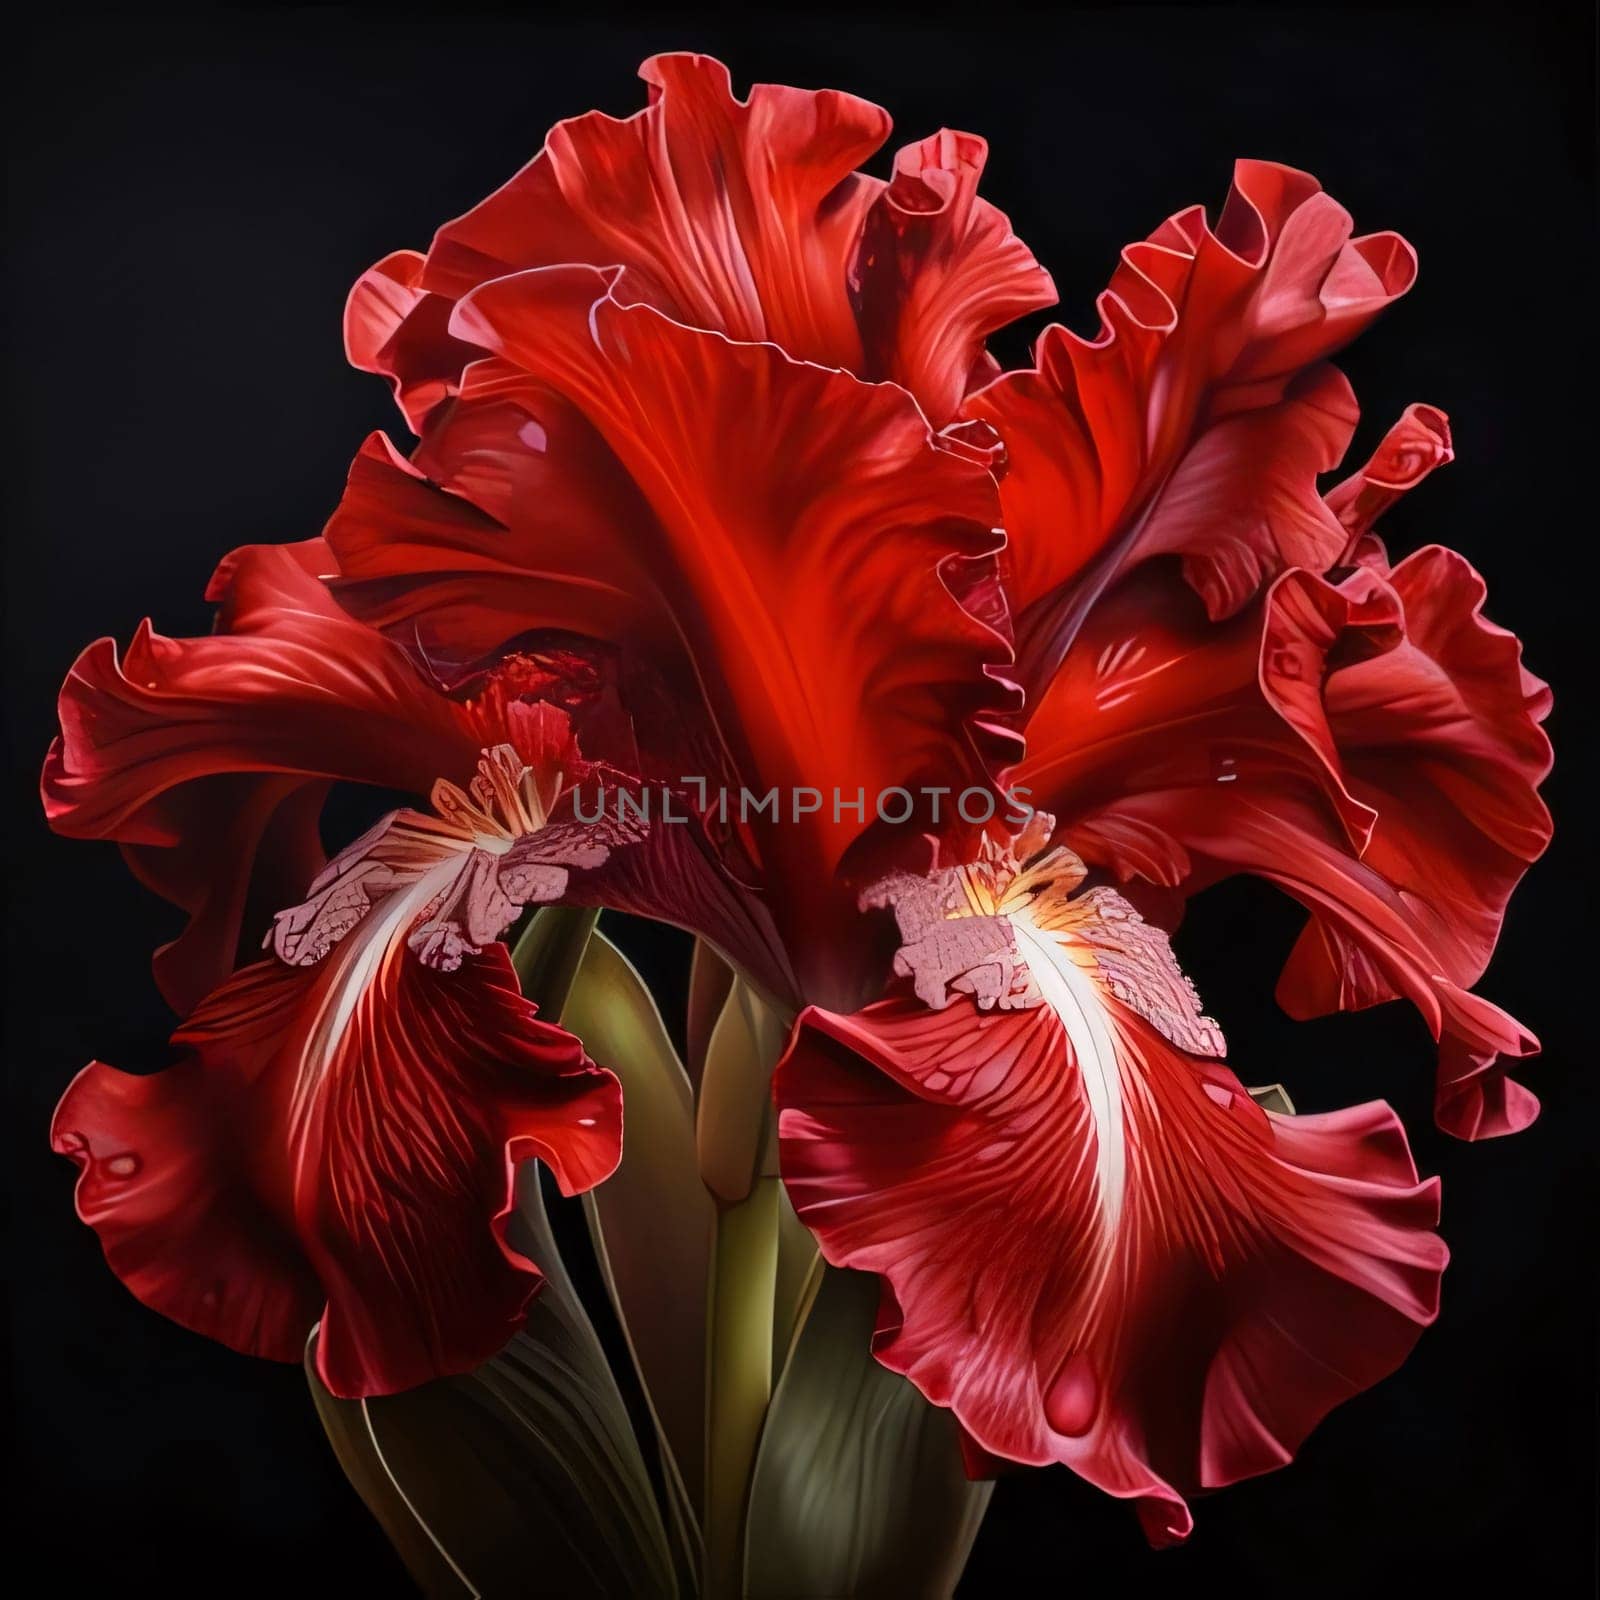 Red lily close-up photo, black isolated background. Flowering flowers, a symbol of spring, new life. A joyful time of nature waking up to life.